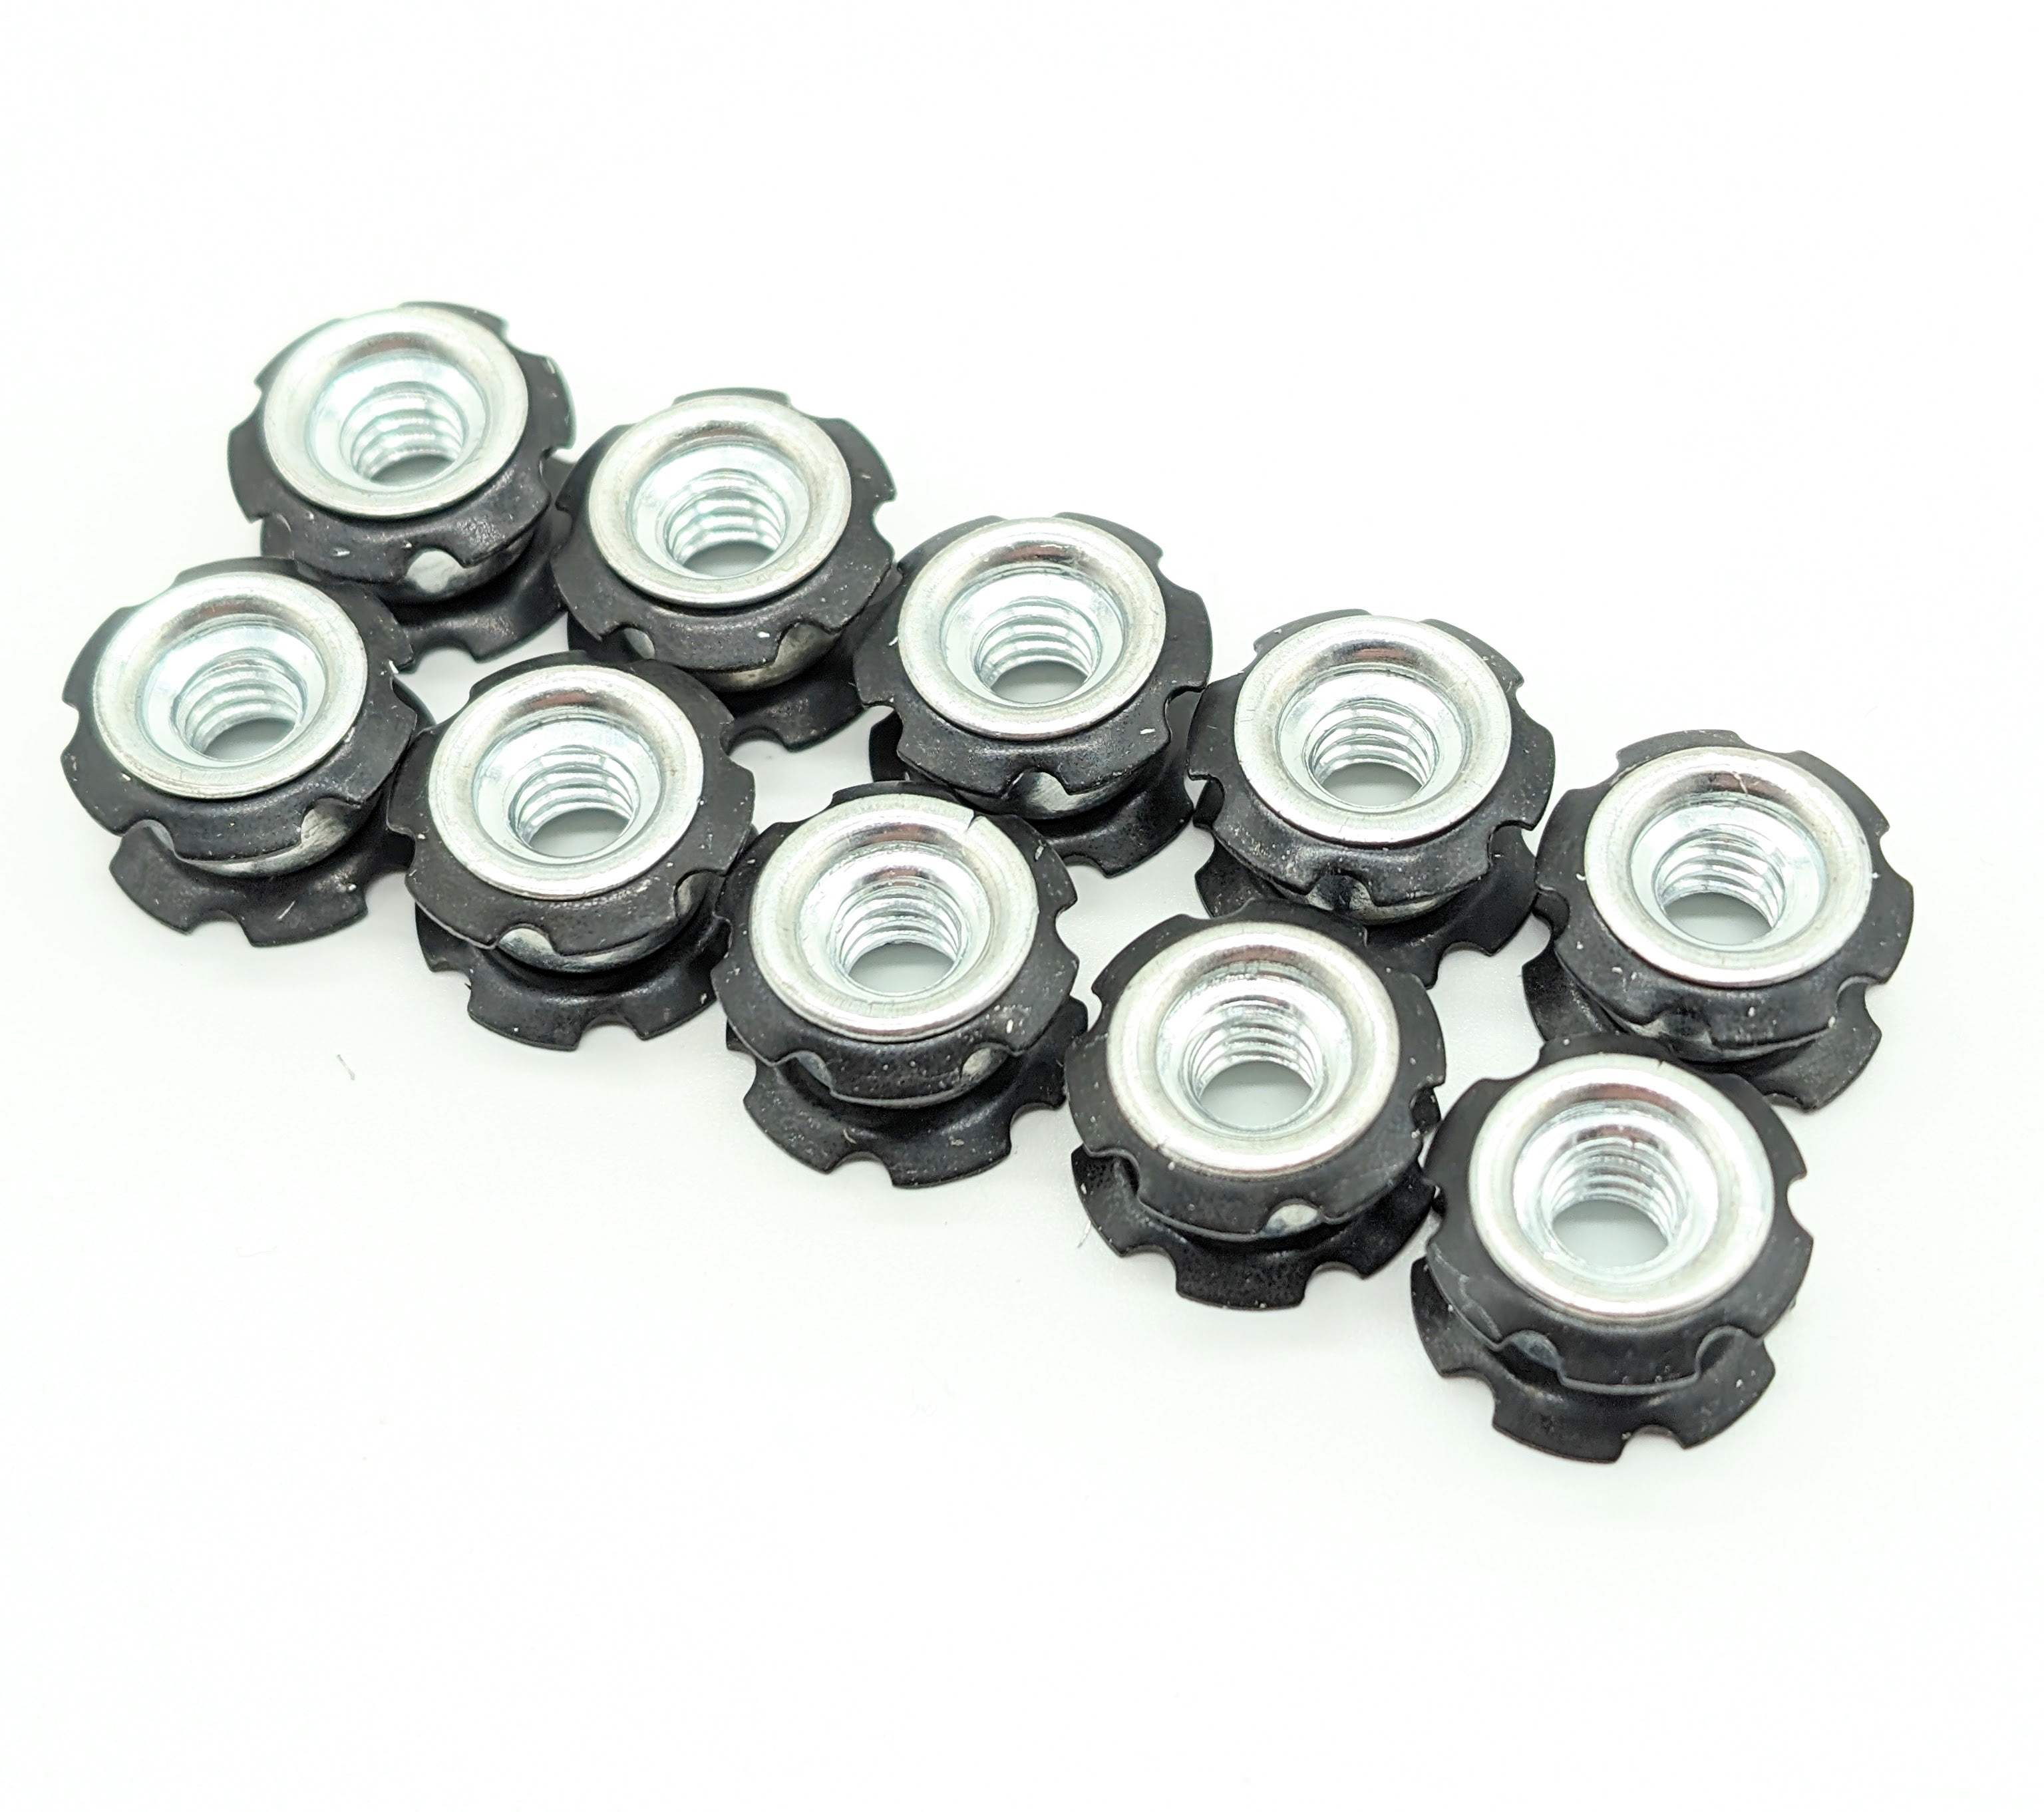 QTY 10 - Tube Connecting Nut for 5/8" ID Tube